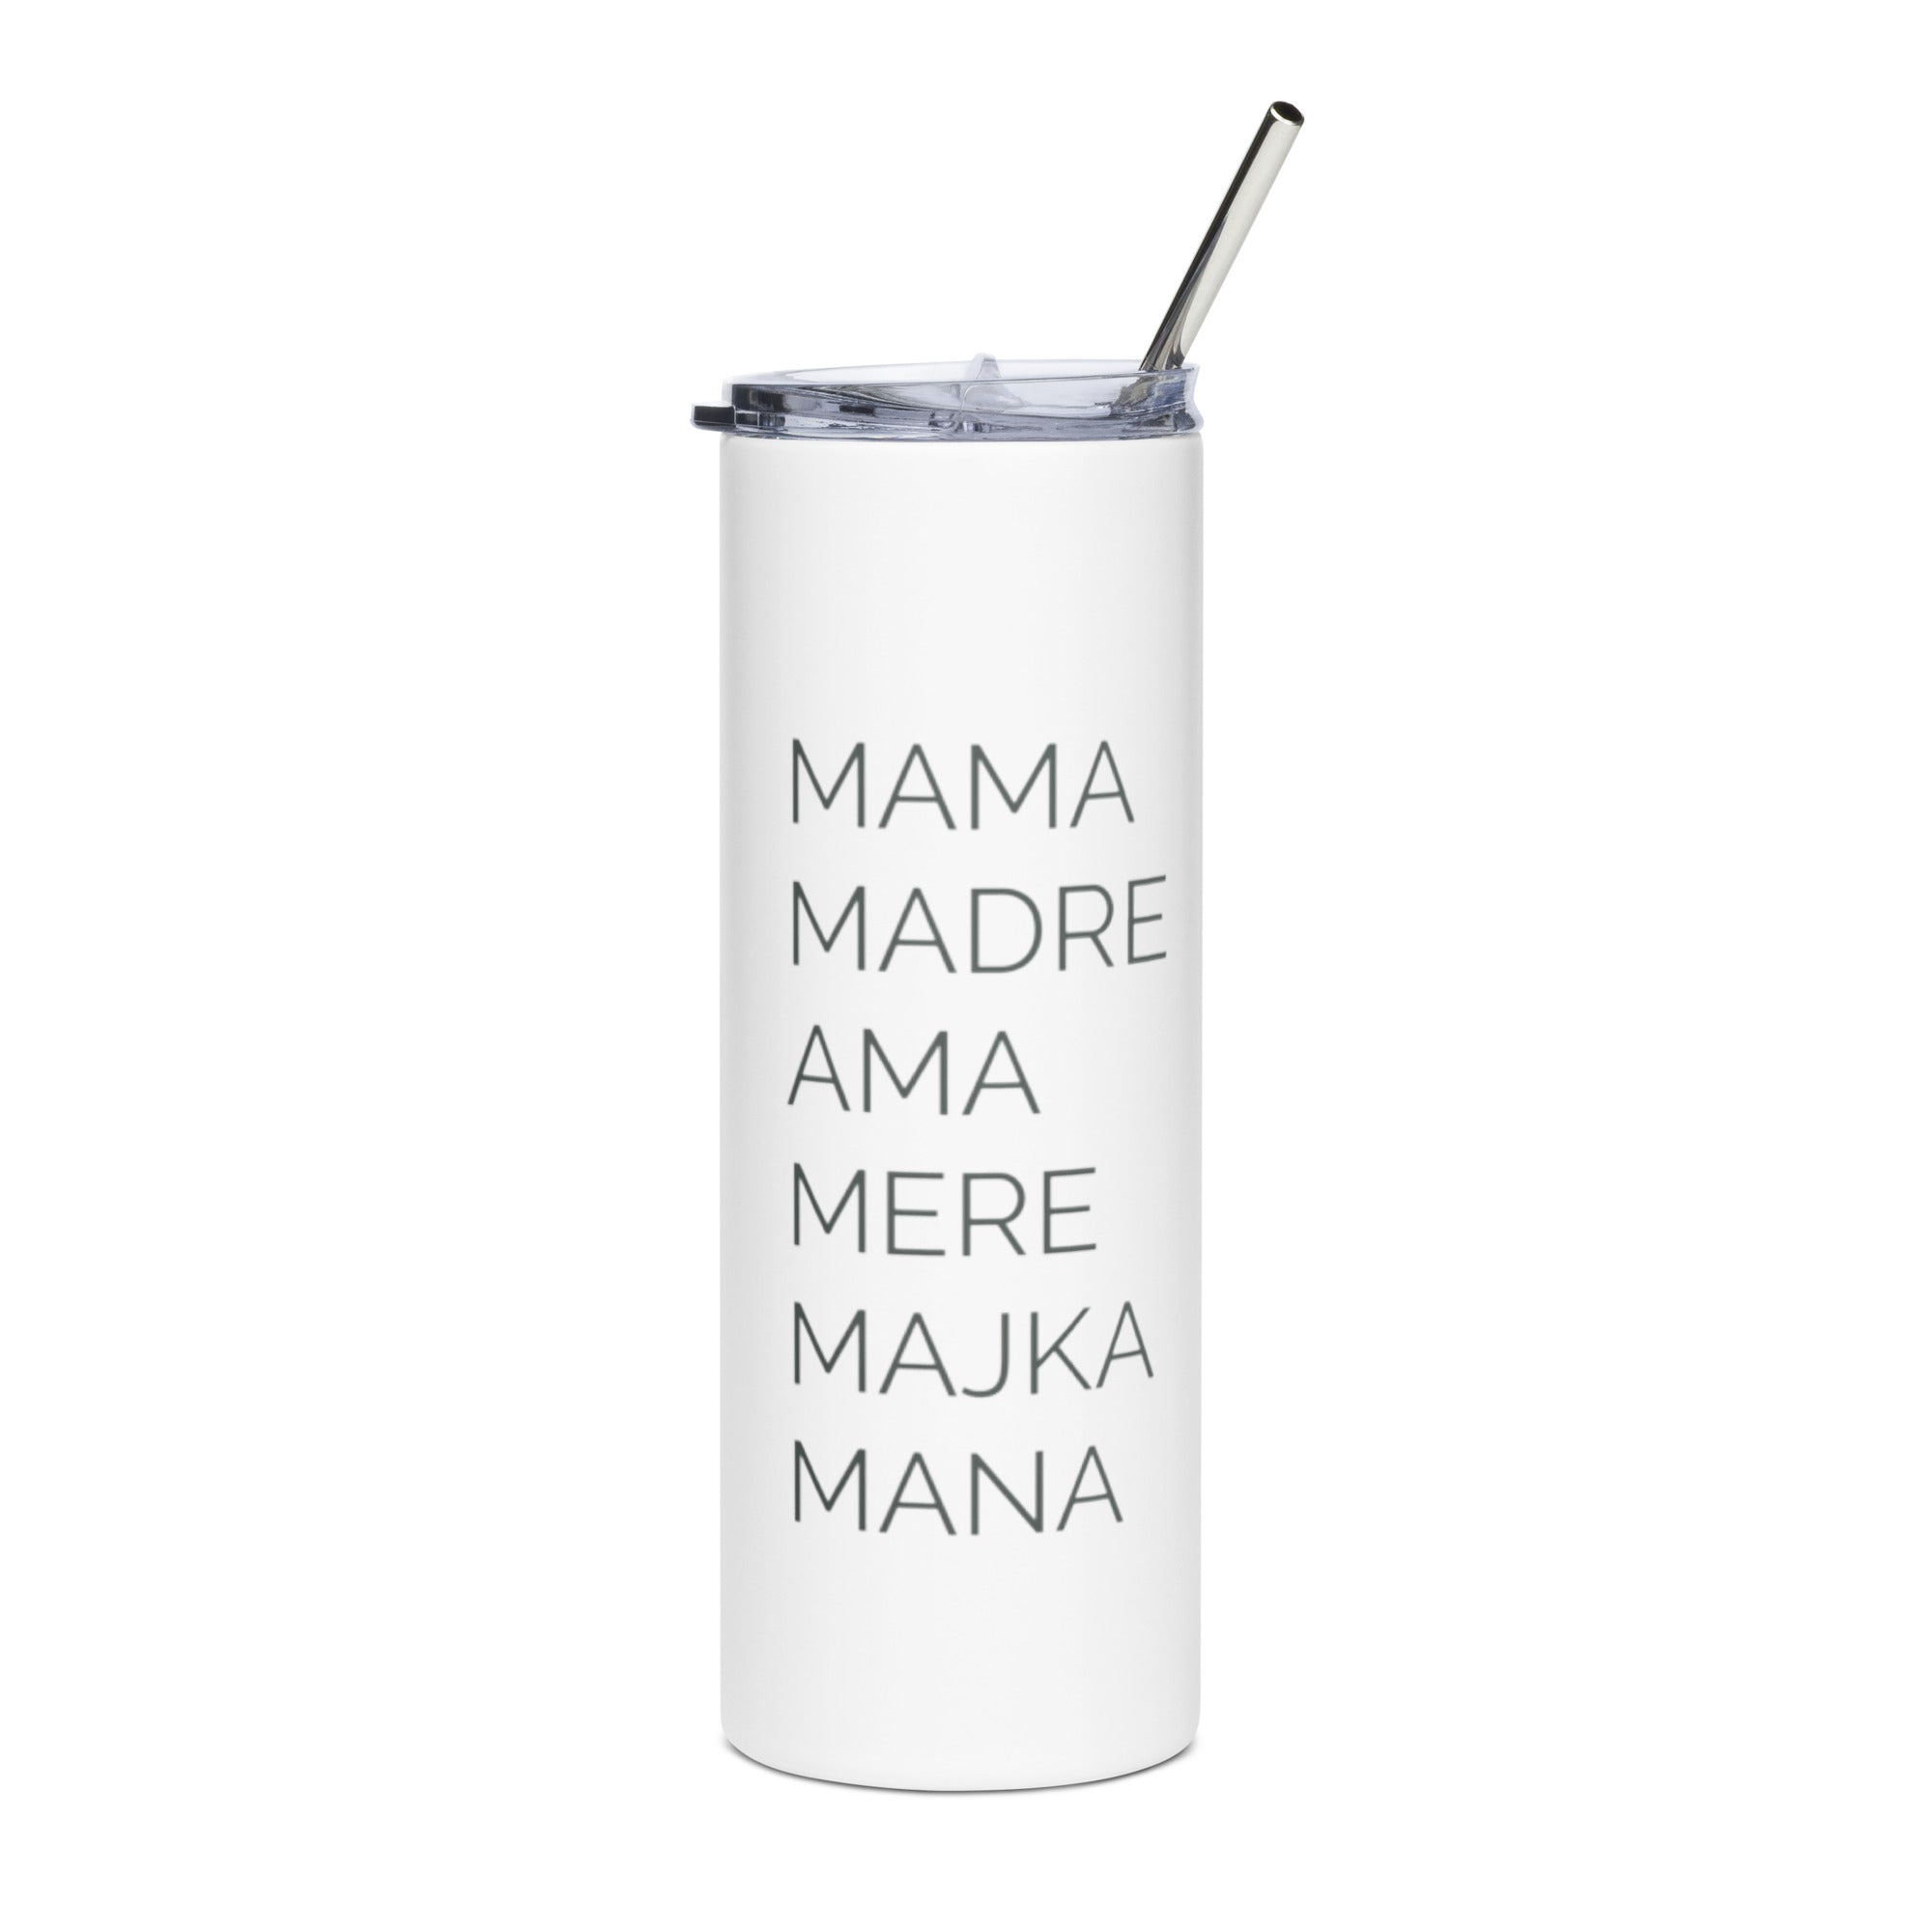 Stainless steel tumbler for all mamas